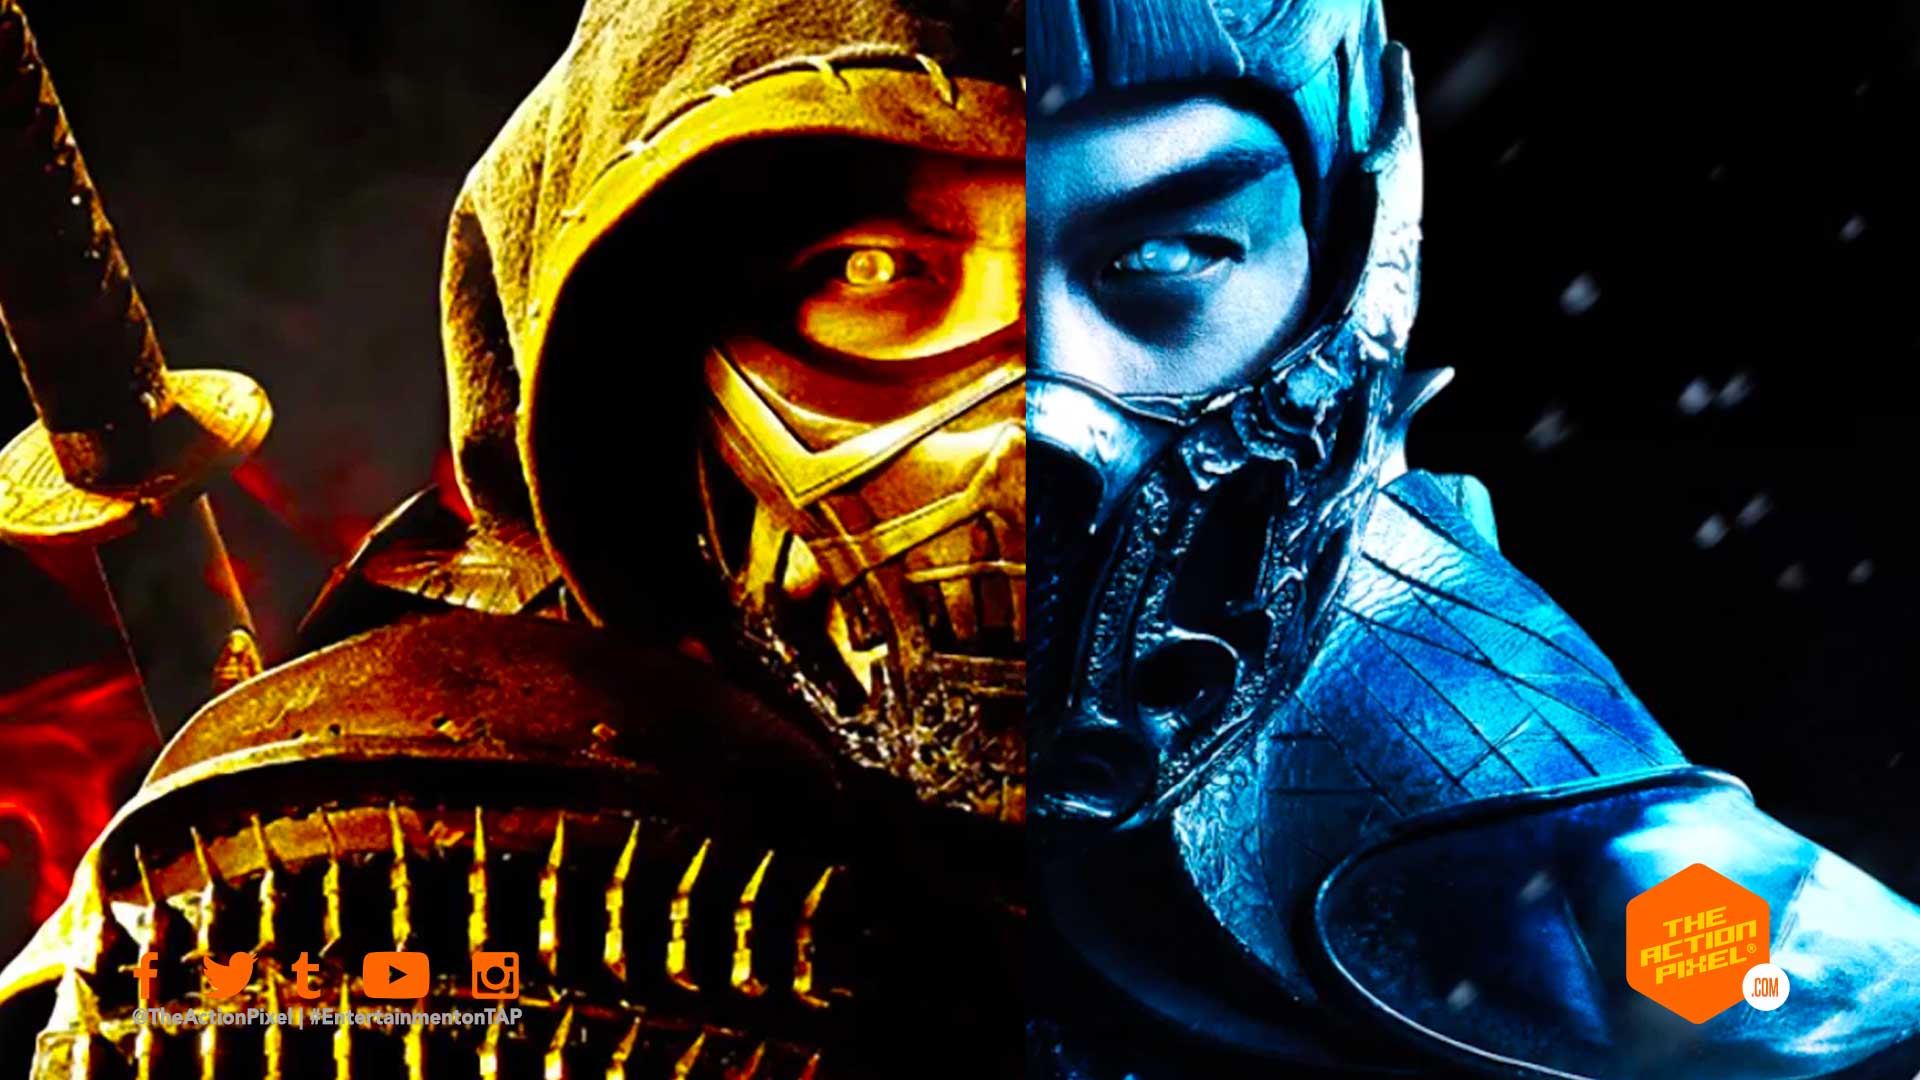 Mortal Kombat” movie motion posters reveal the fight roster in the battle for Earthrealm